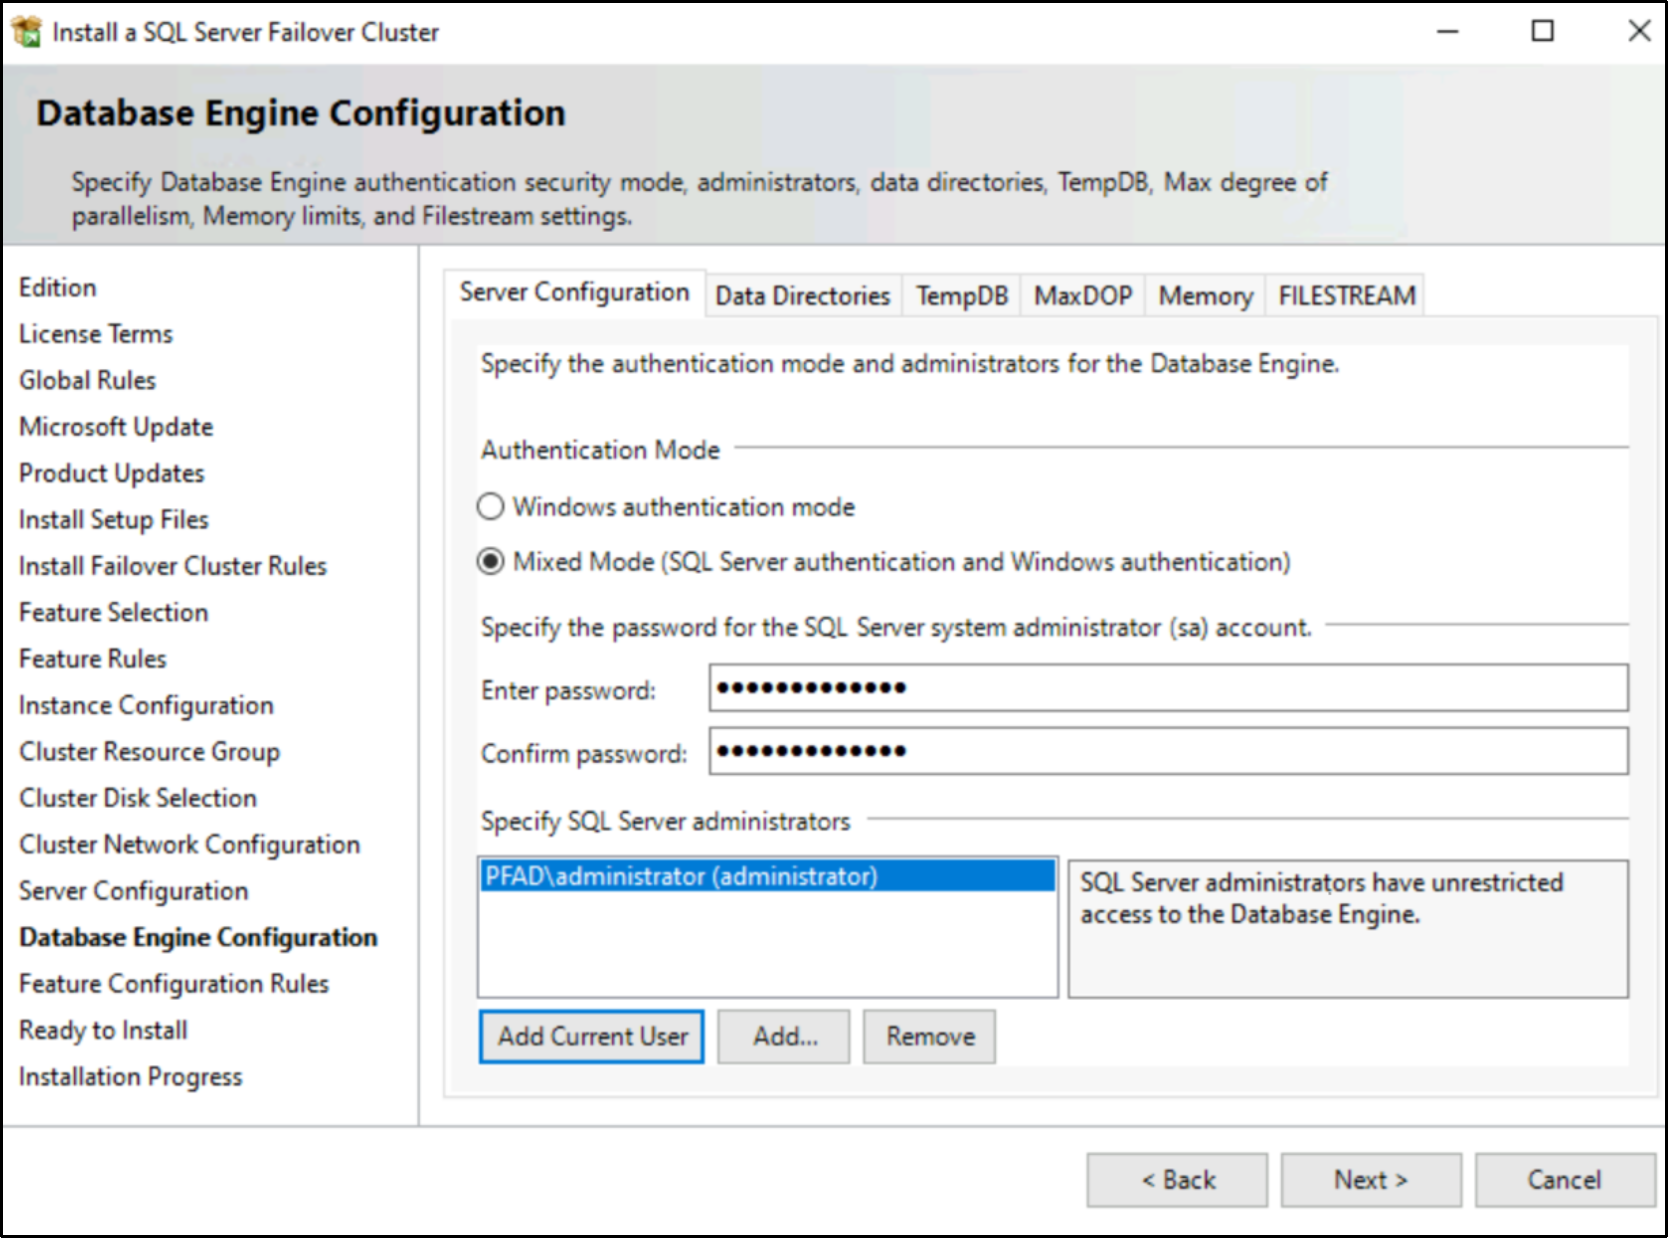 This figure shows the database engine configuration details.